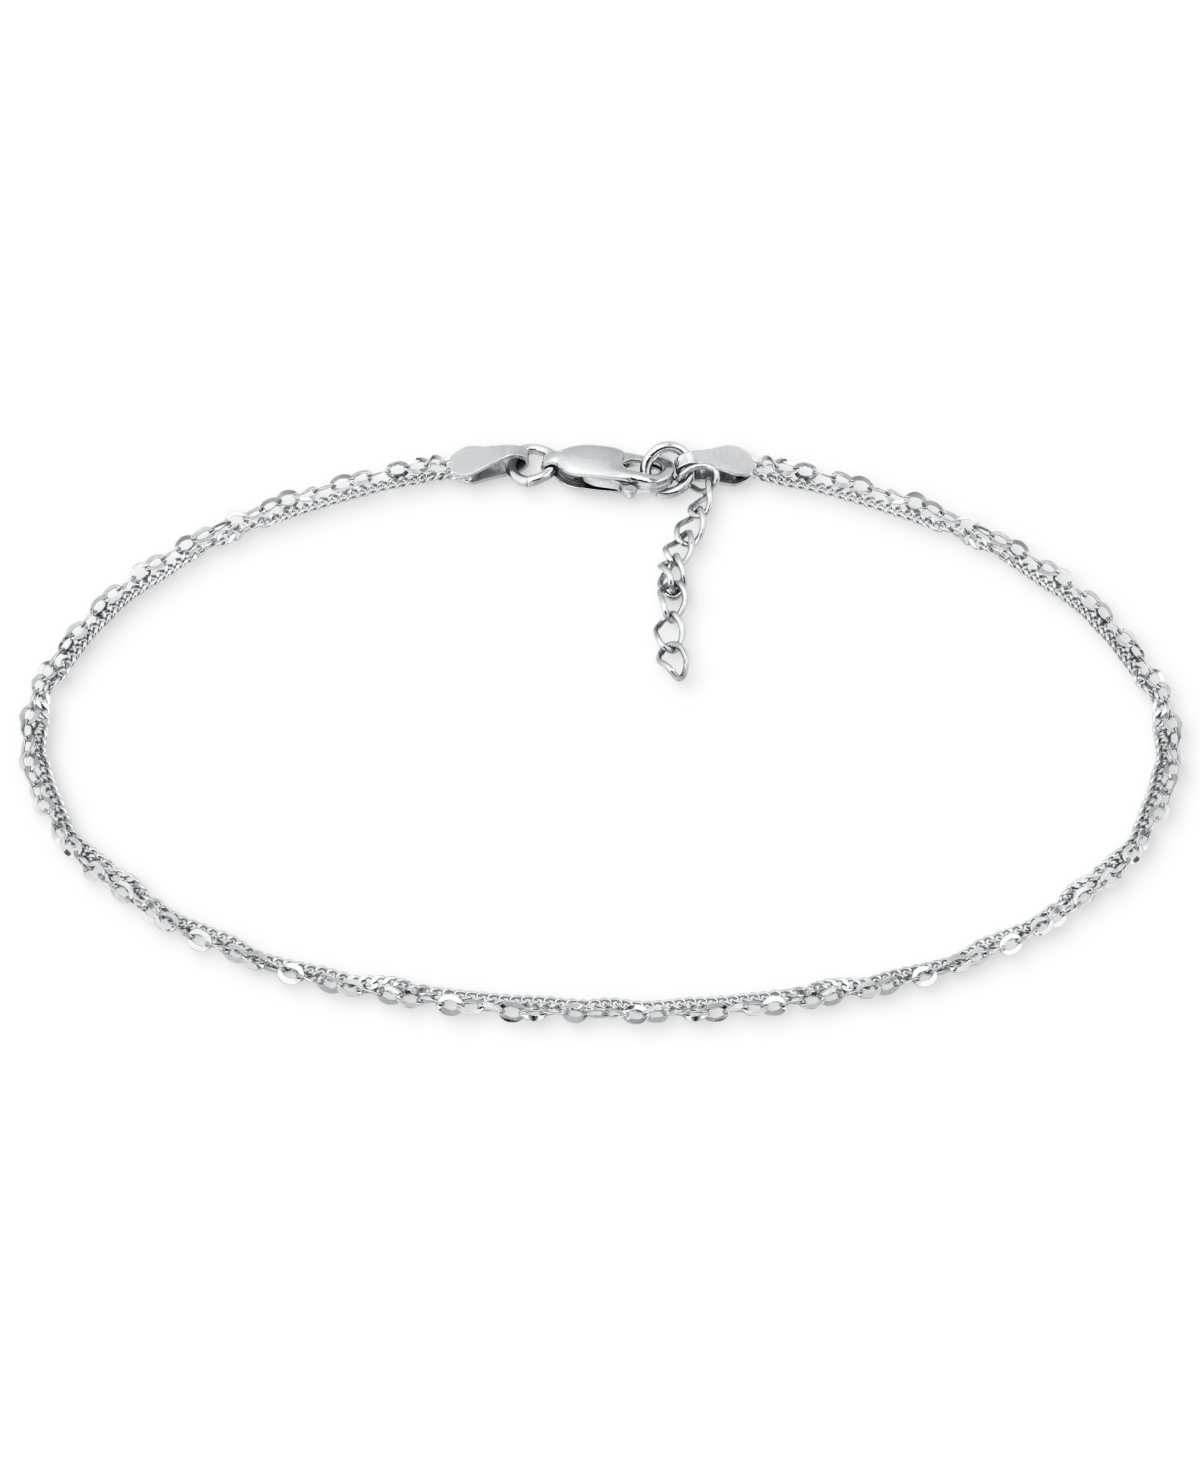 Double Chain Link Ankle Bracelet in Sterling Silver and 18k Over Silver, Created for Macy's - Gold Over Silver